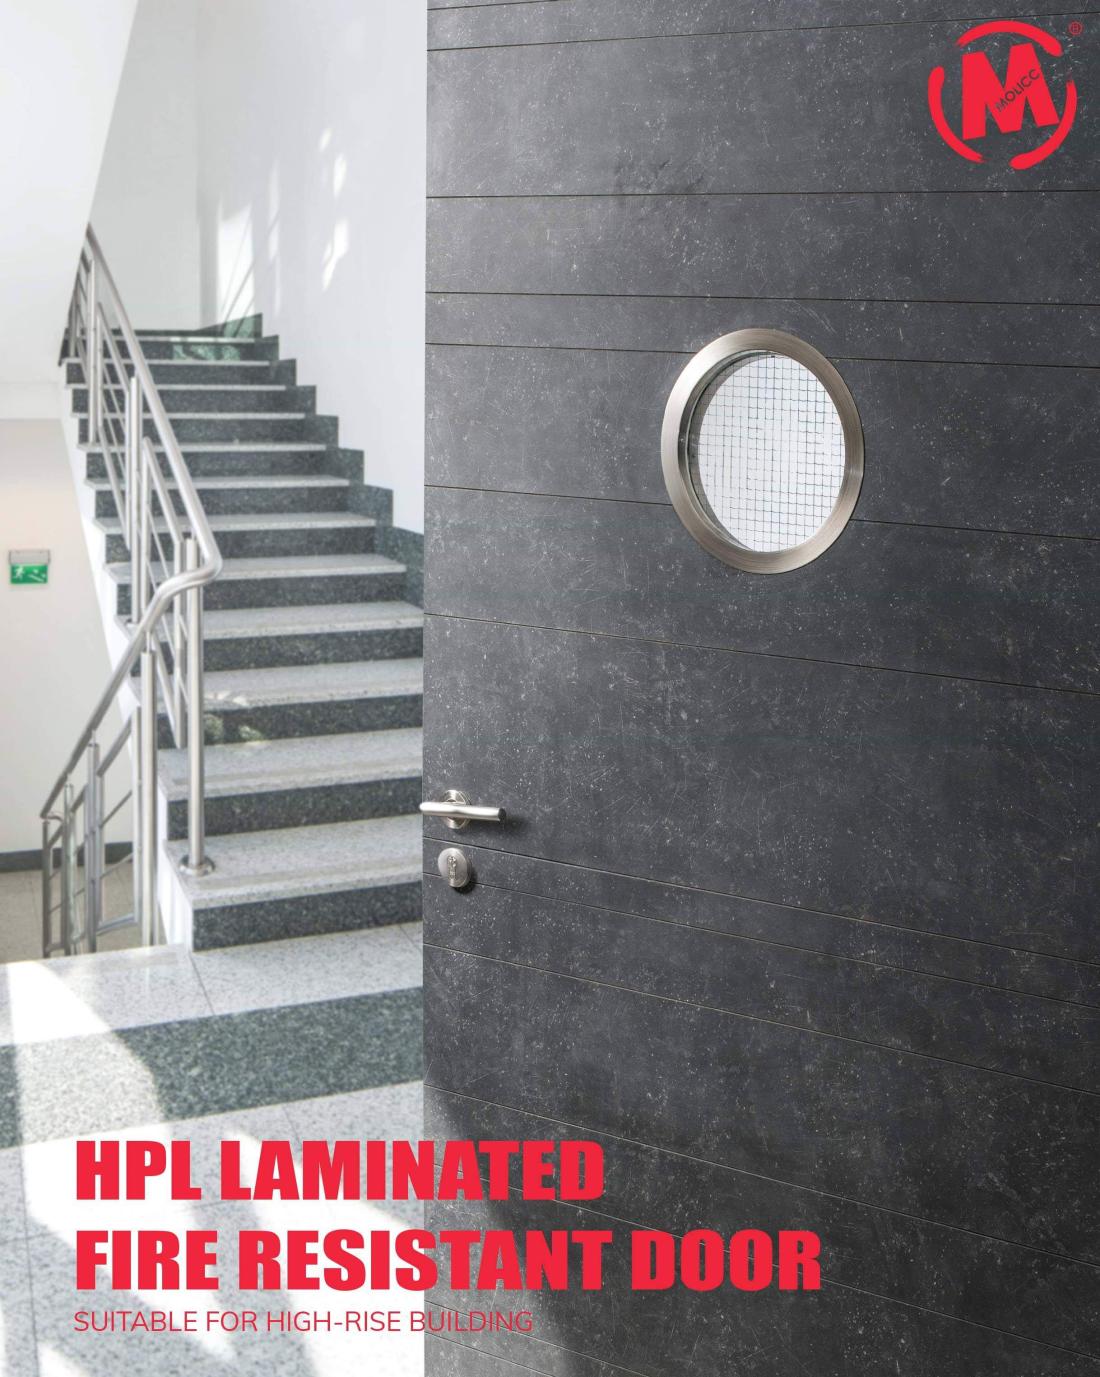 HPL-Laminated One-Hour-Fire Resistant-Door-High-Rise-building.jpg